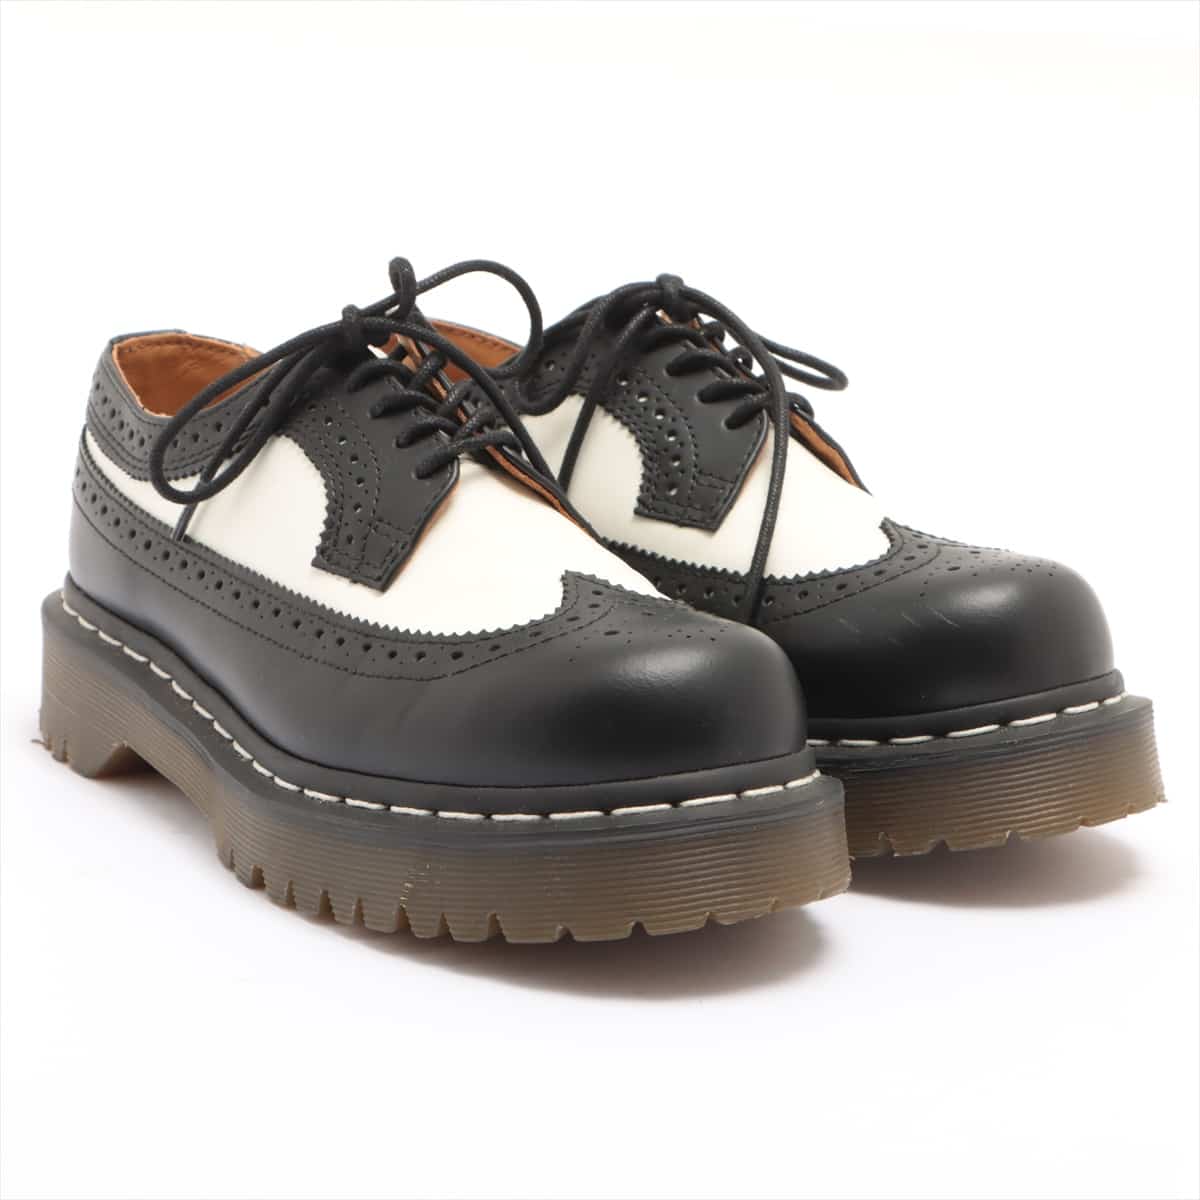 Dr. Martens Leather Leather shoes UK4 Ladies' Black × White WY004 5 holes wingtip